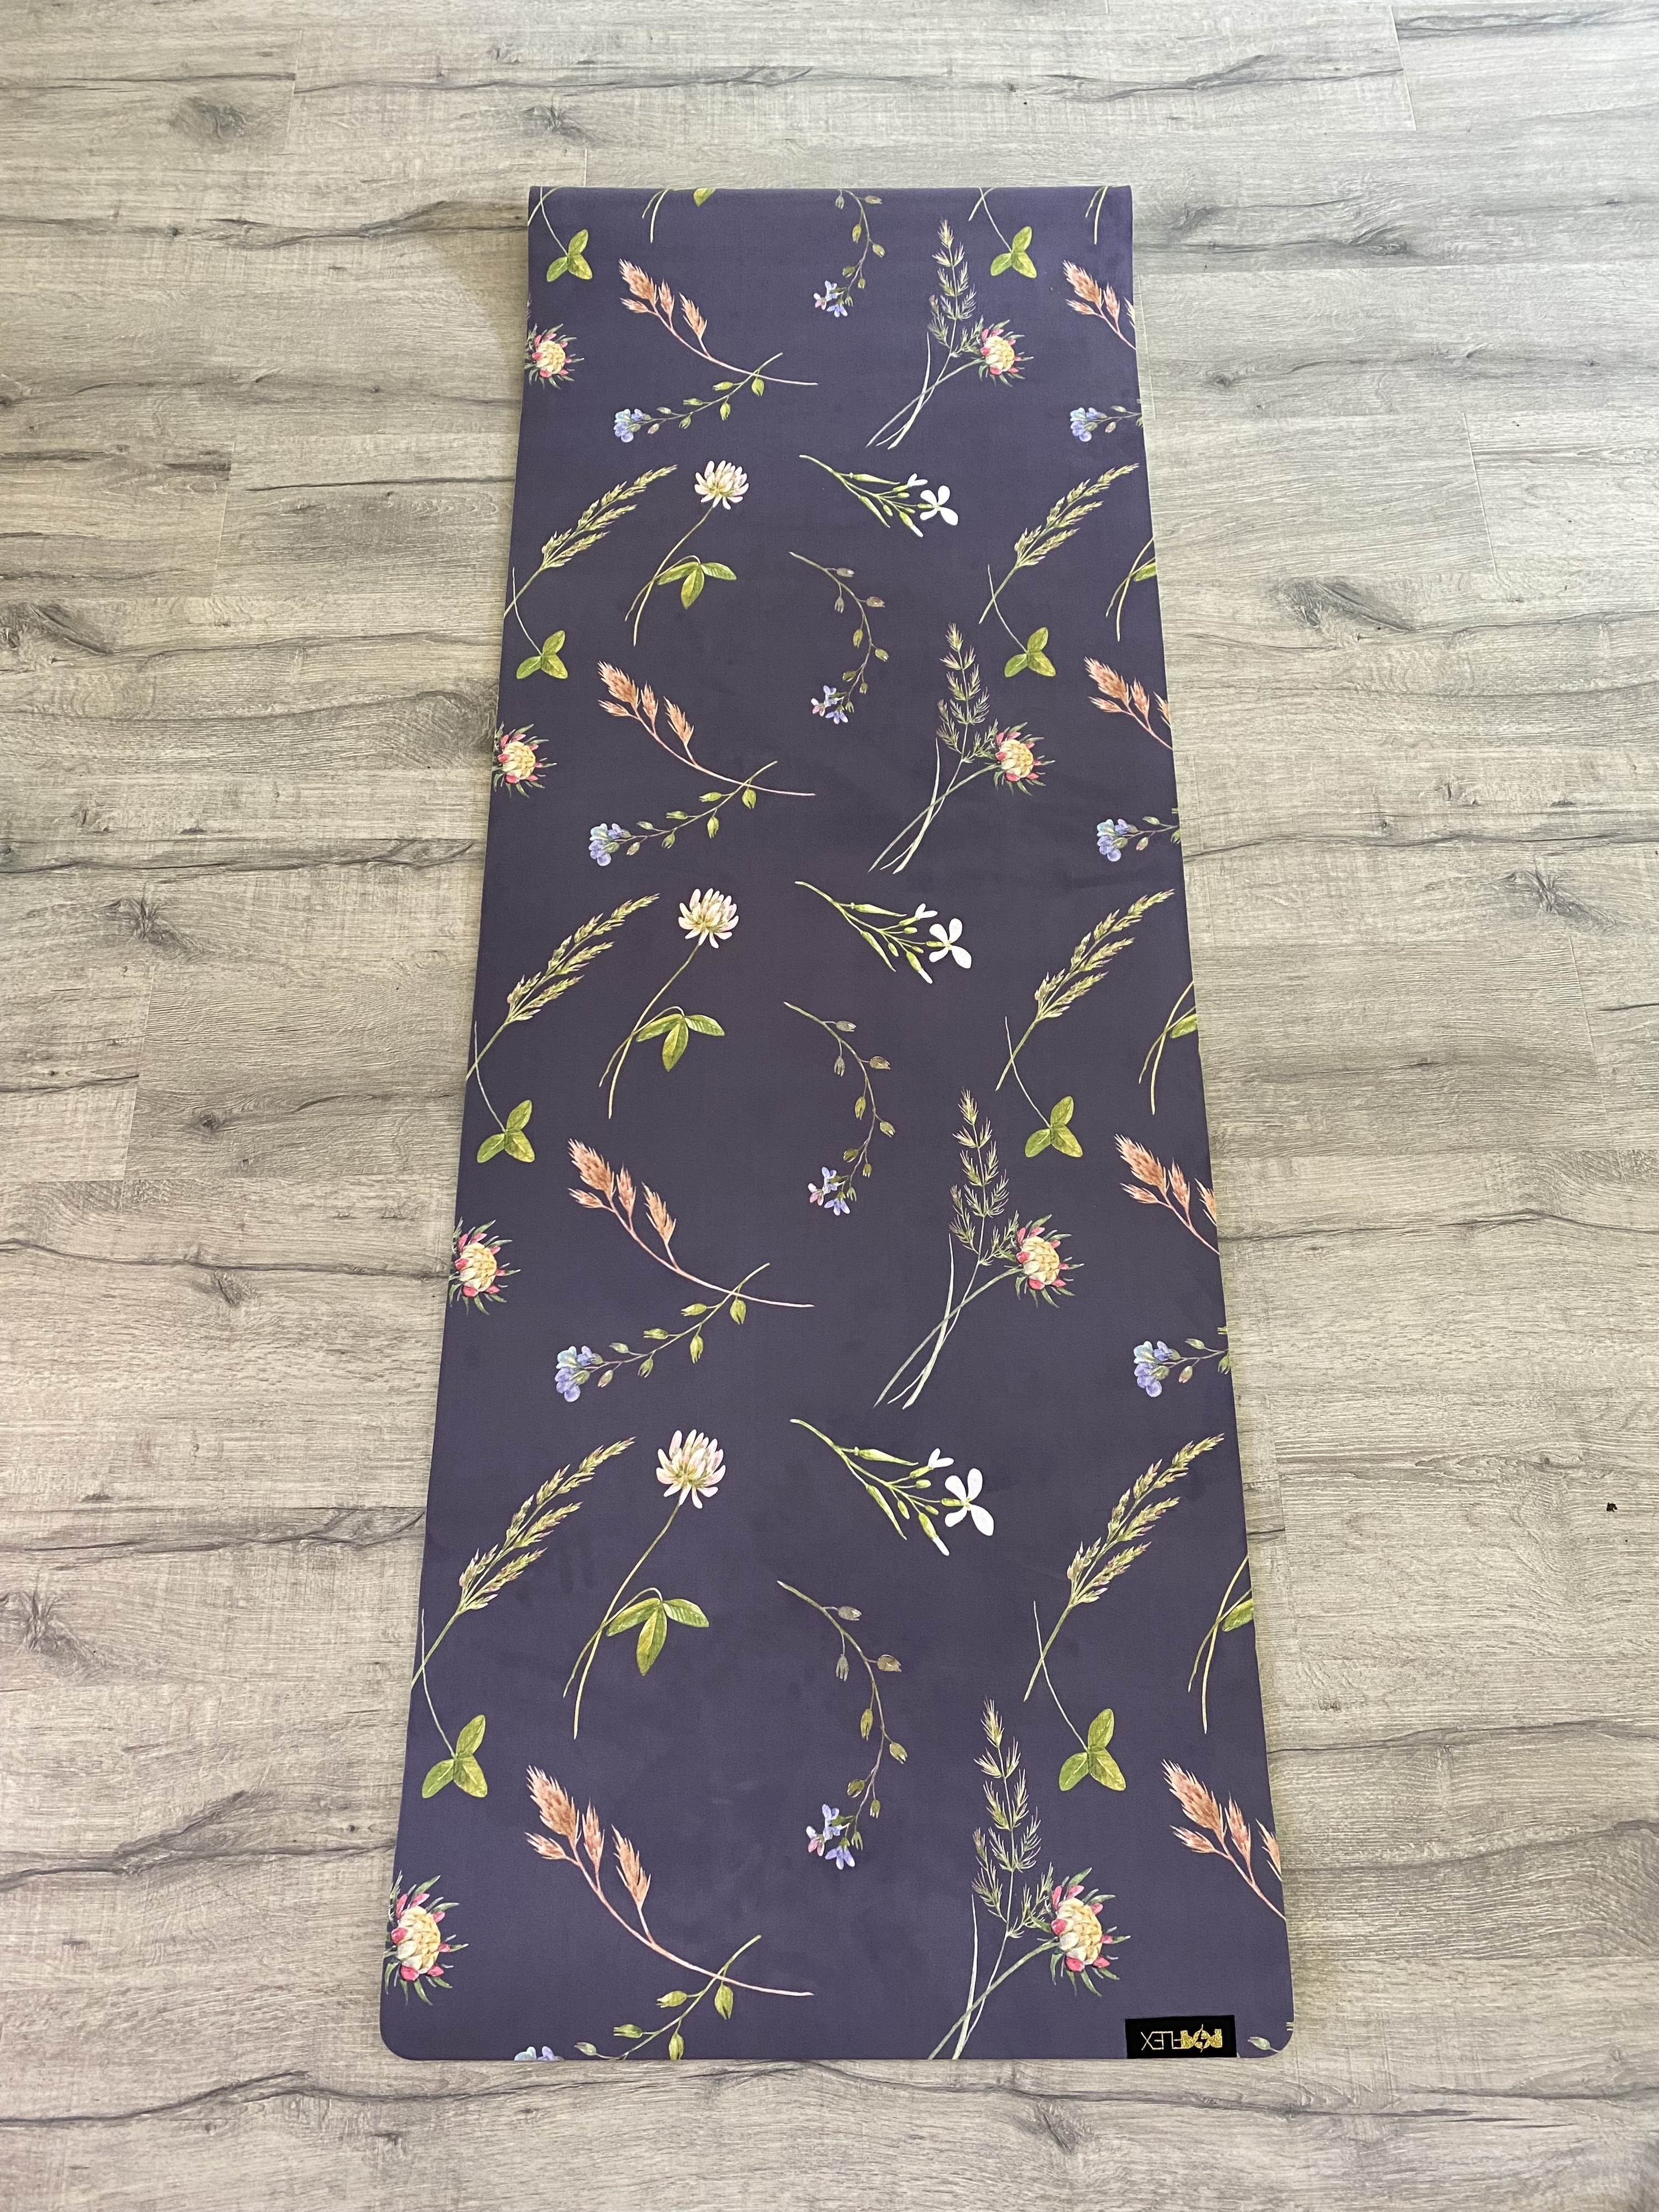 The yoga mat laid out on the floor, with a whimsical floral print